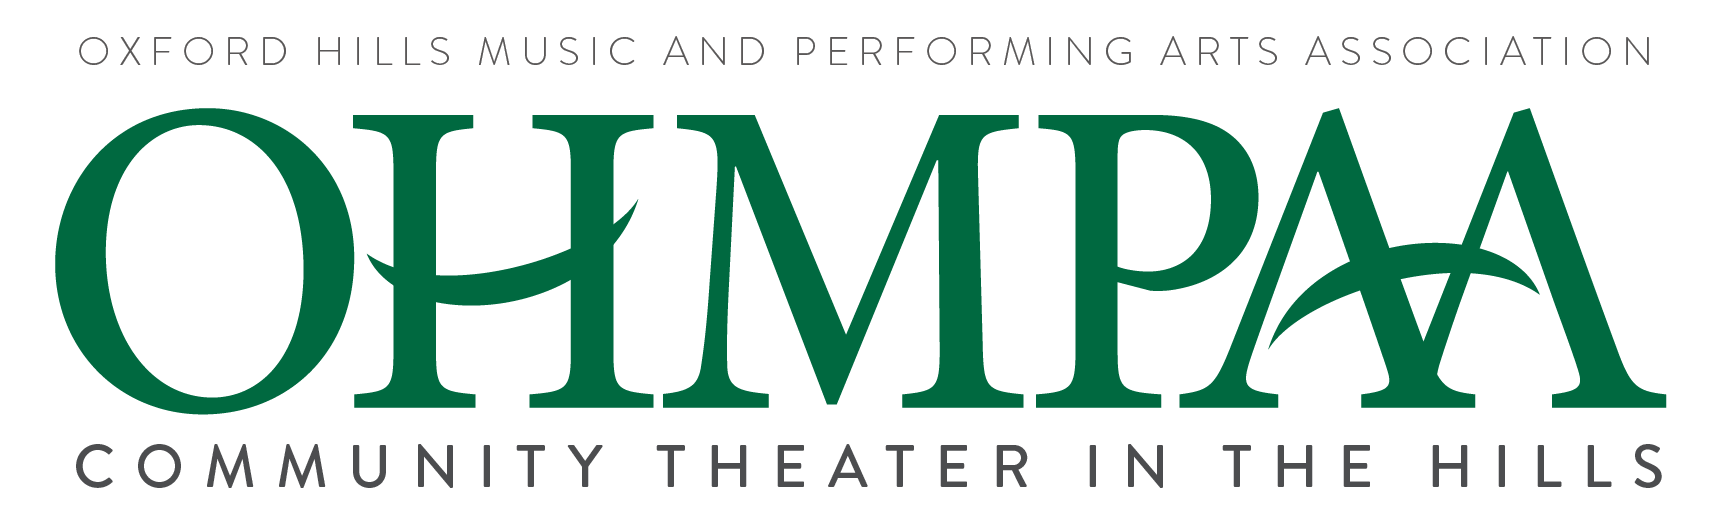 OHMPAA - Community Theater in the Hills